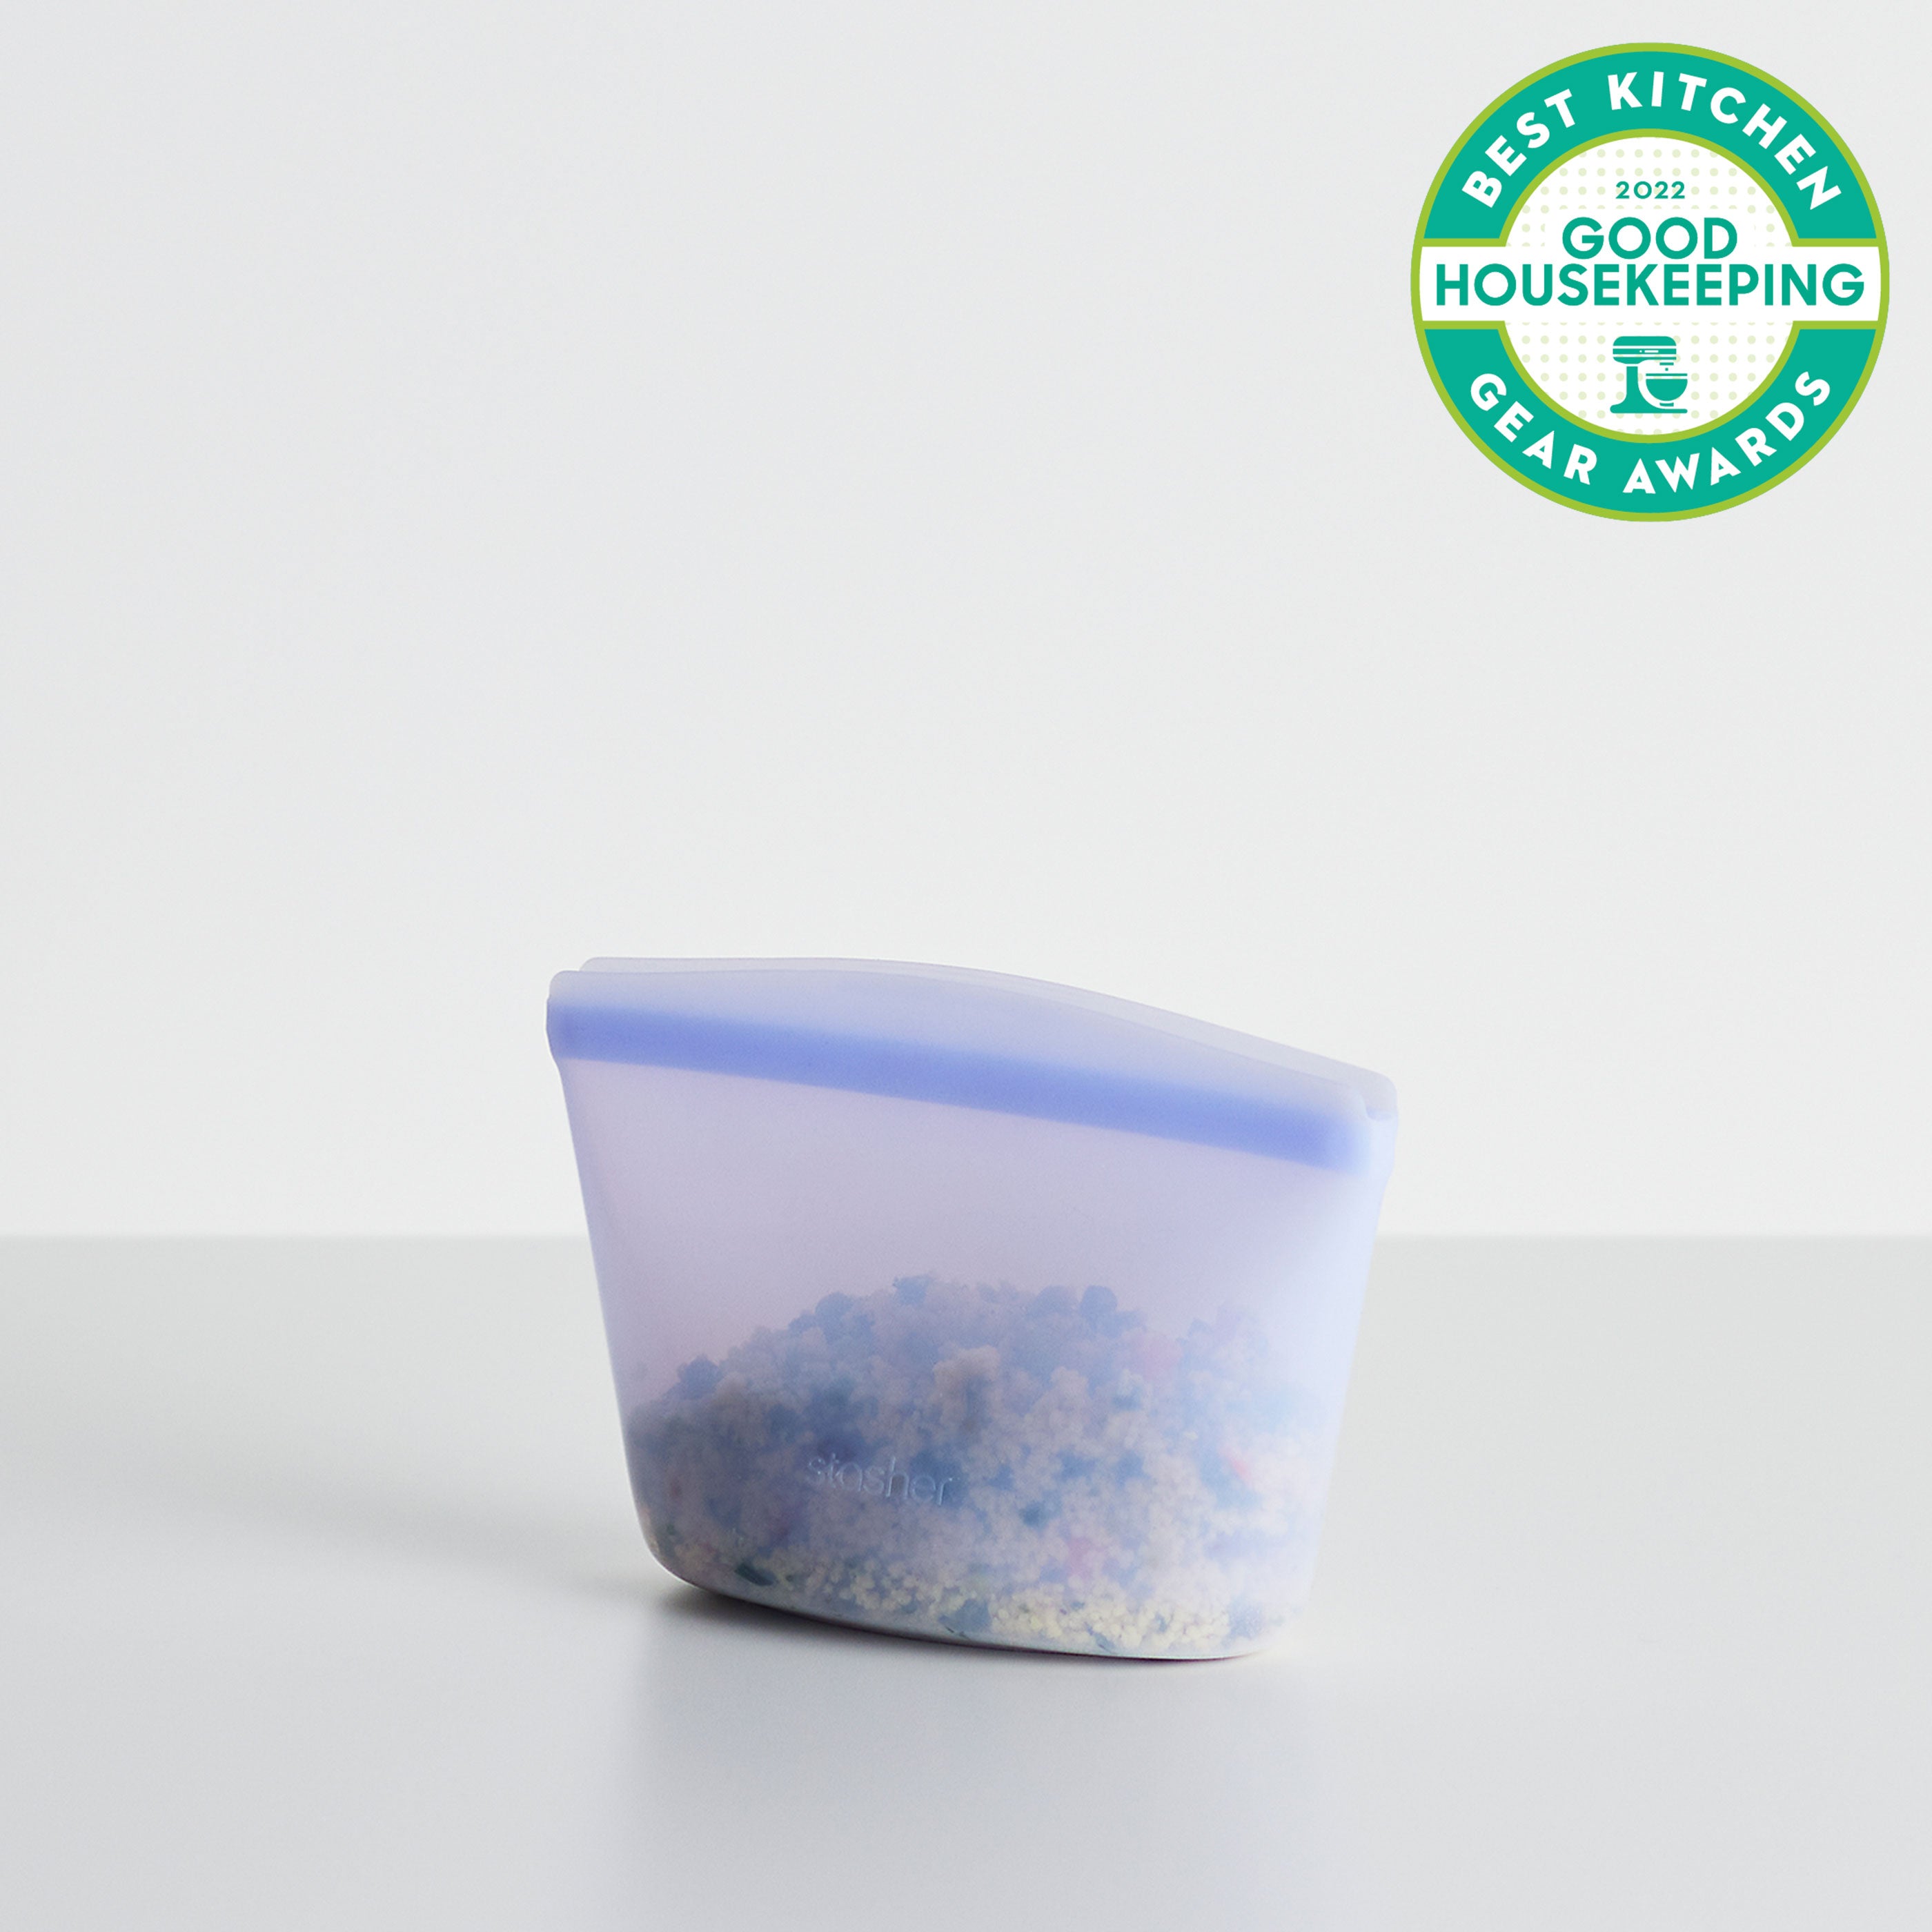 New Design High Quality Silicone Container For Small Items